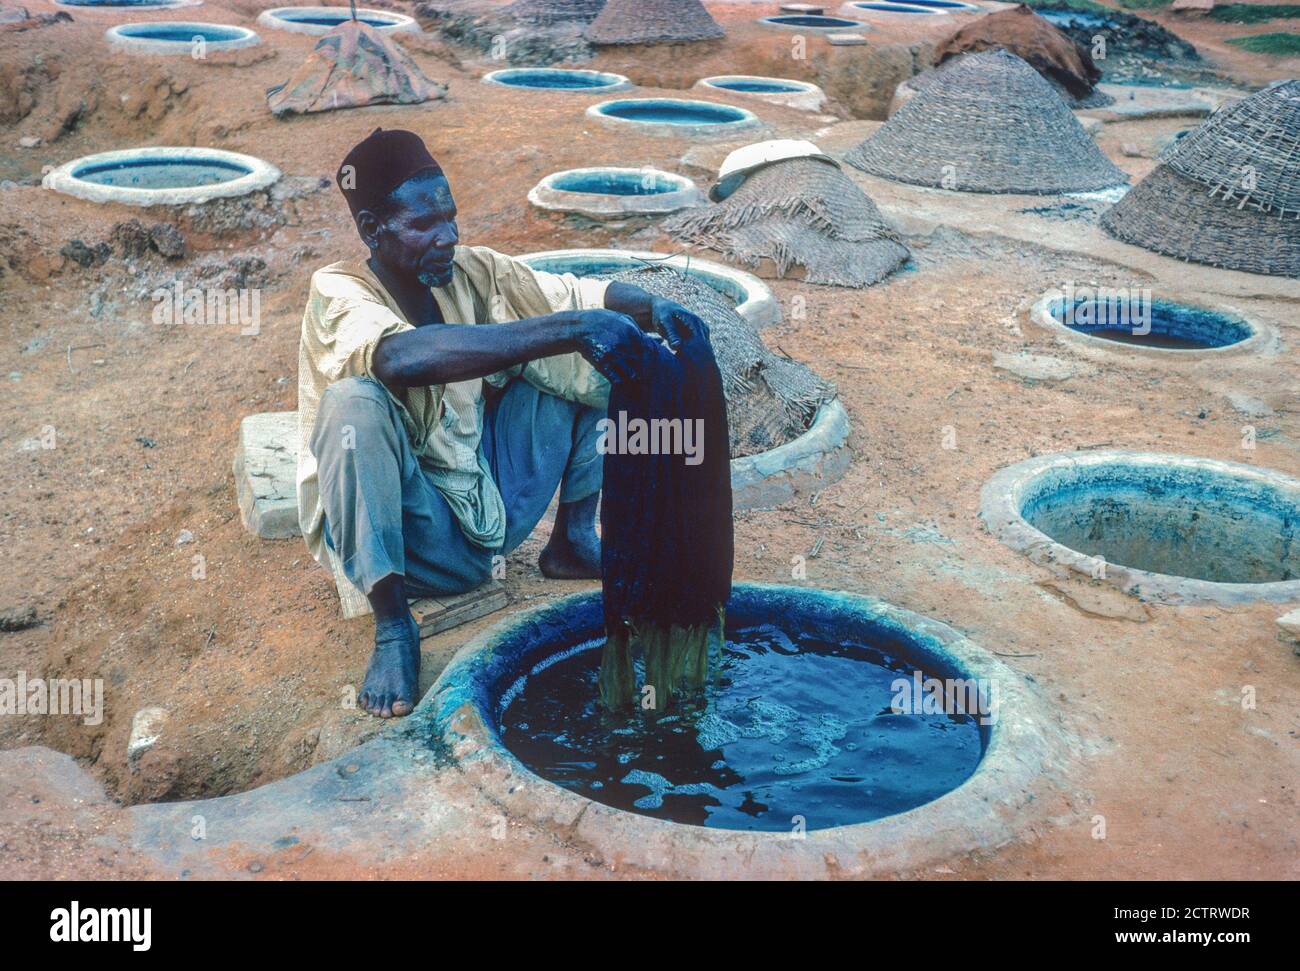 Kano, Nigeria. Dyer Dying Cloth in the Indigo Dying Pits of Kano